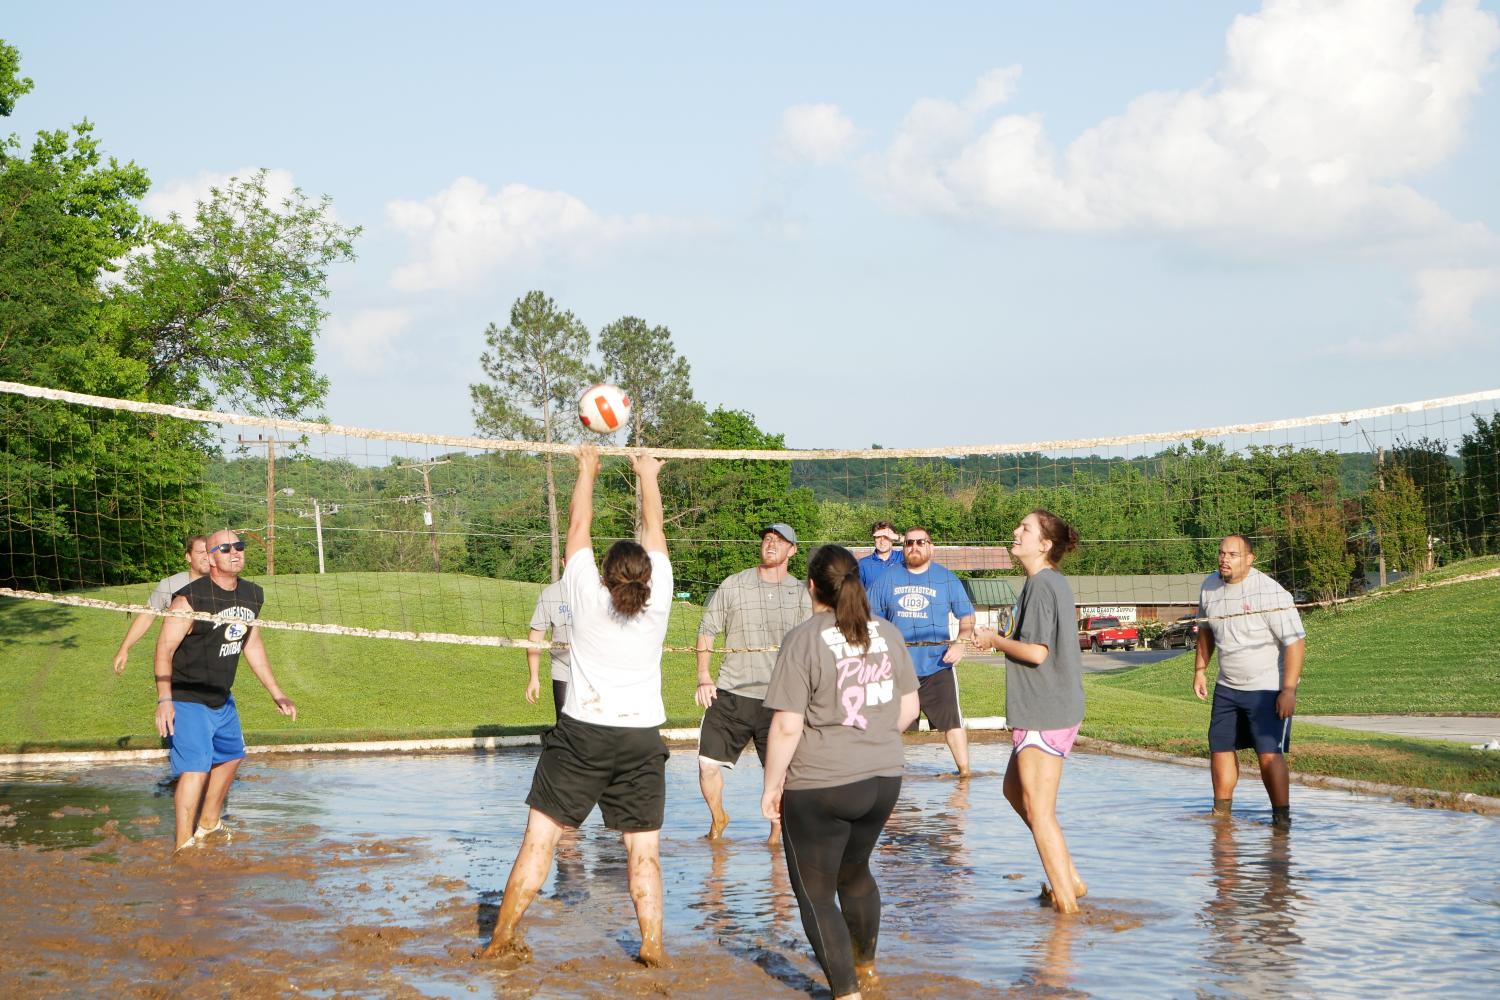 Spring+Fest+teams+competed+in+a+game+of+mud+volleyball+on+Thursday%2C+April+20.